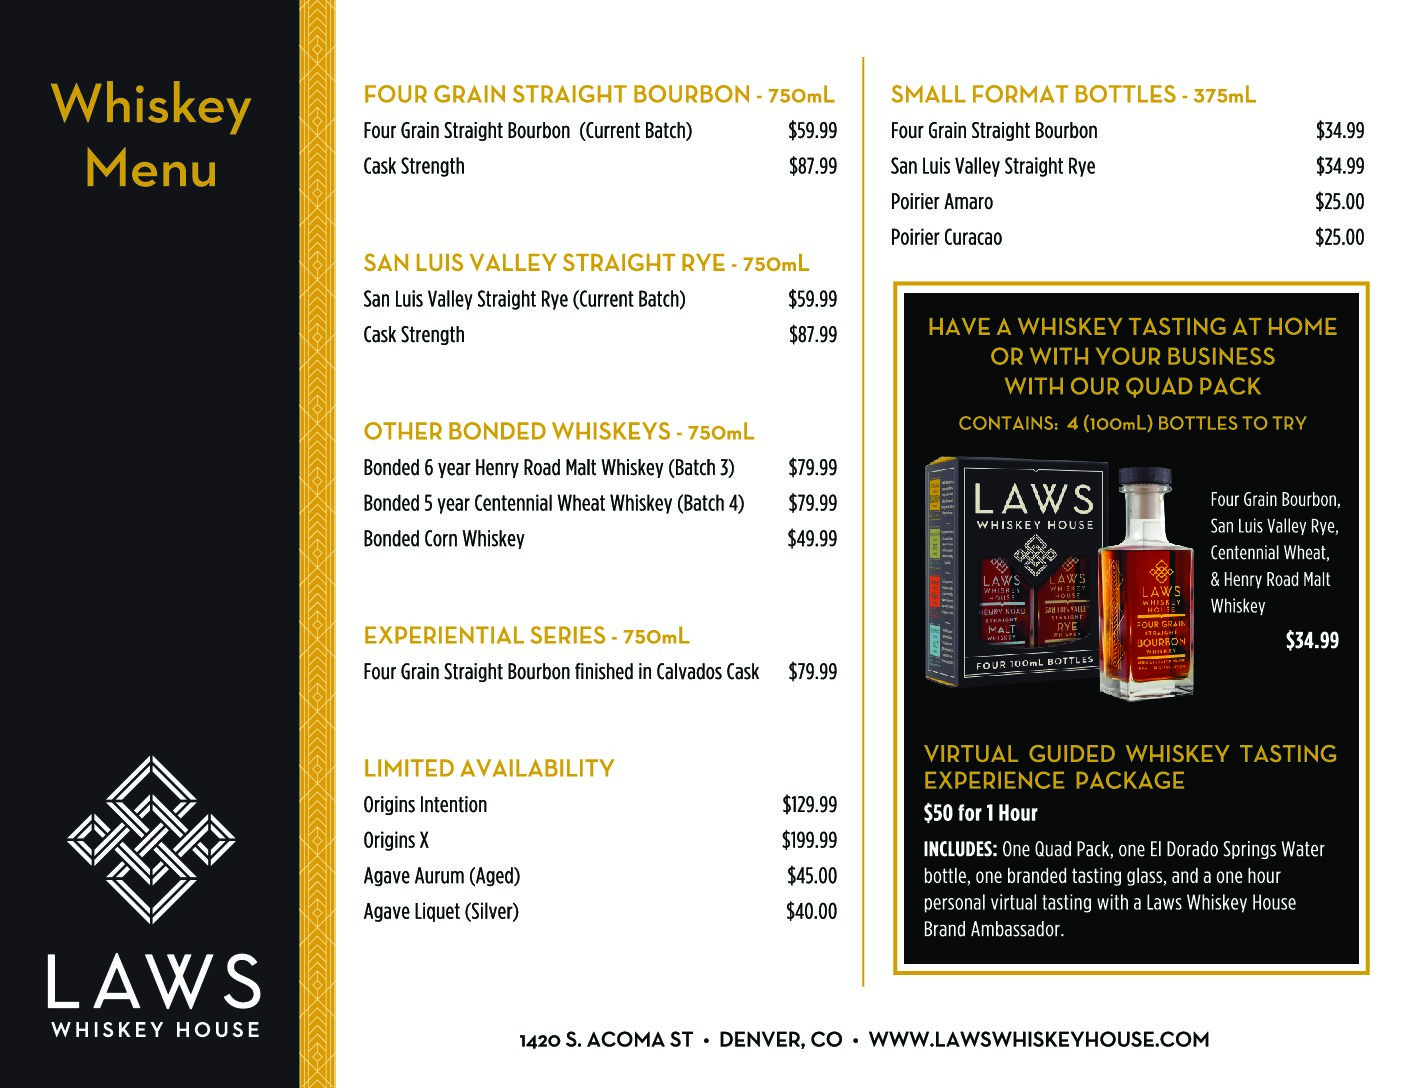 Laws Whiskey bottle sales are back  MENU UPDATE